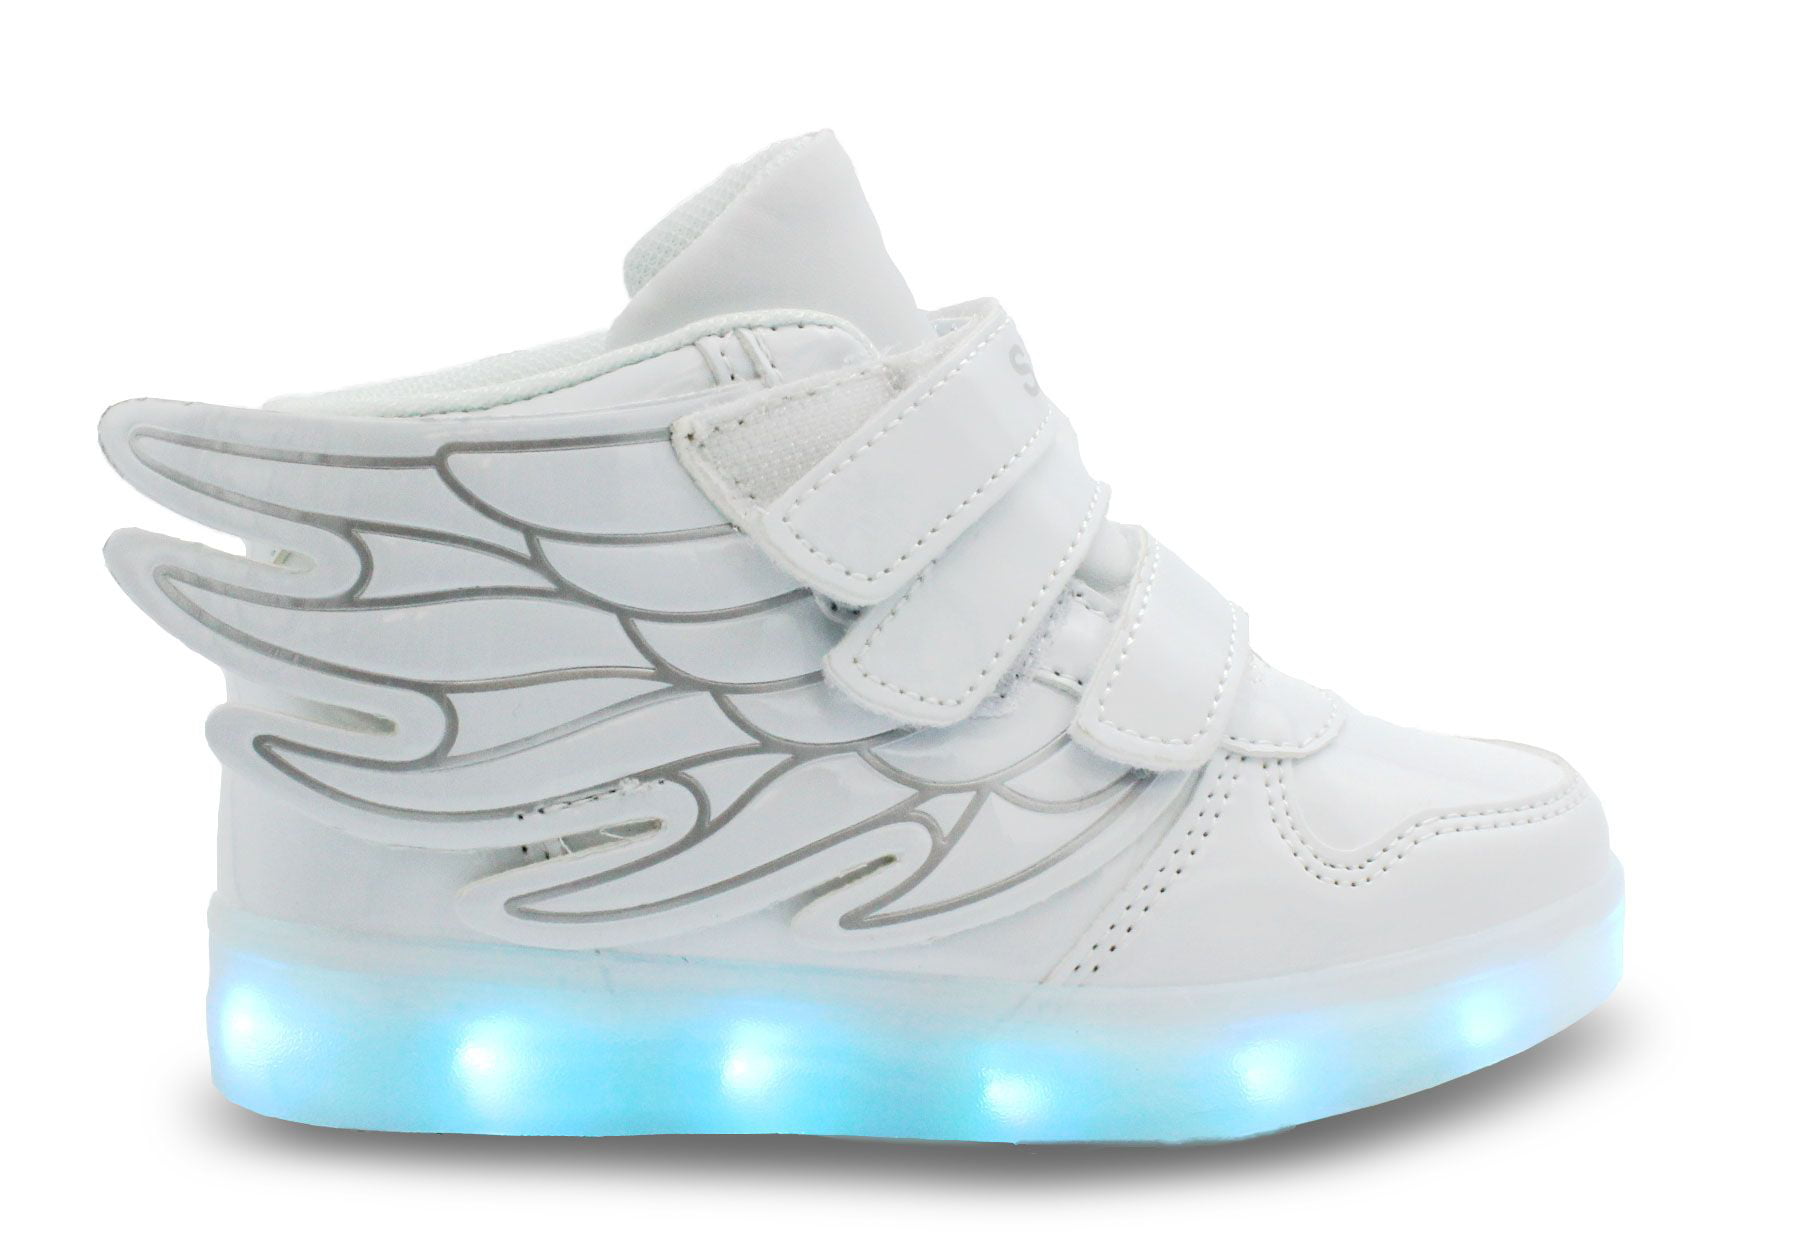 Toddler,Litter Kid,Big Kid strengths Kids LED Light Up Shoes USB Charge Casual Sneakers for Boys Girls